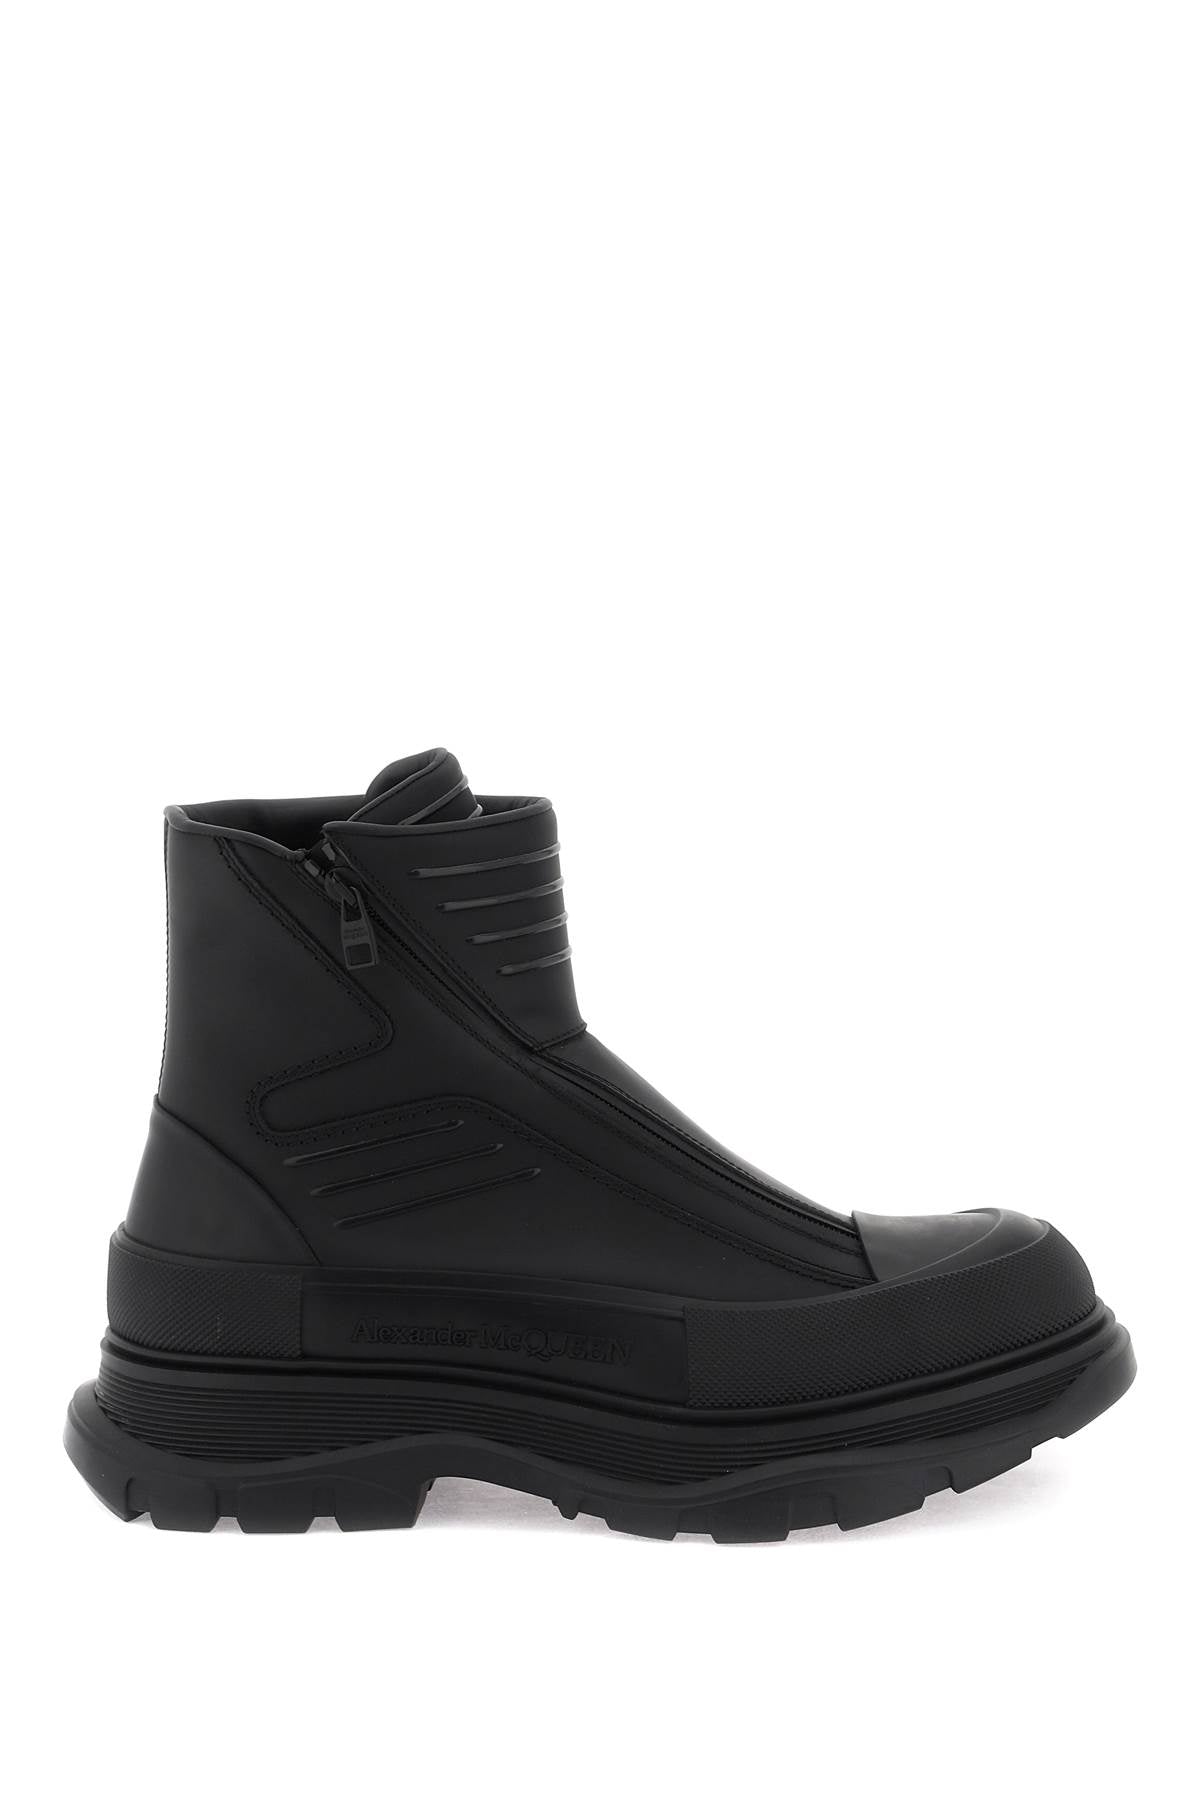 Alexander mcqueen rubberized fabric tread slick ankle boots-0